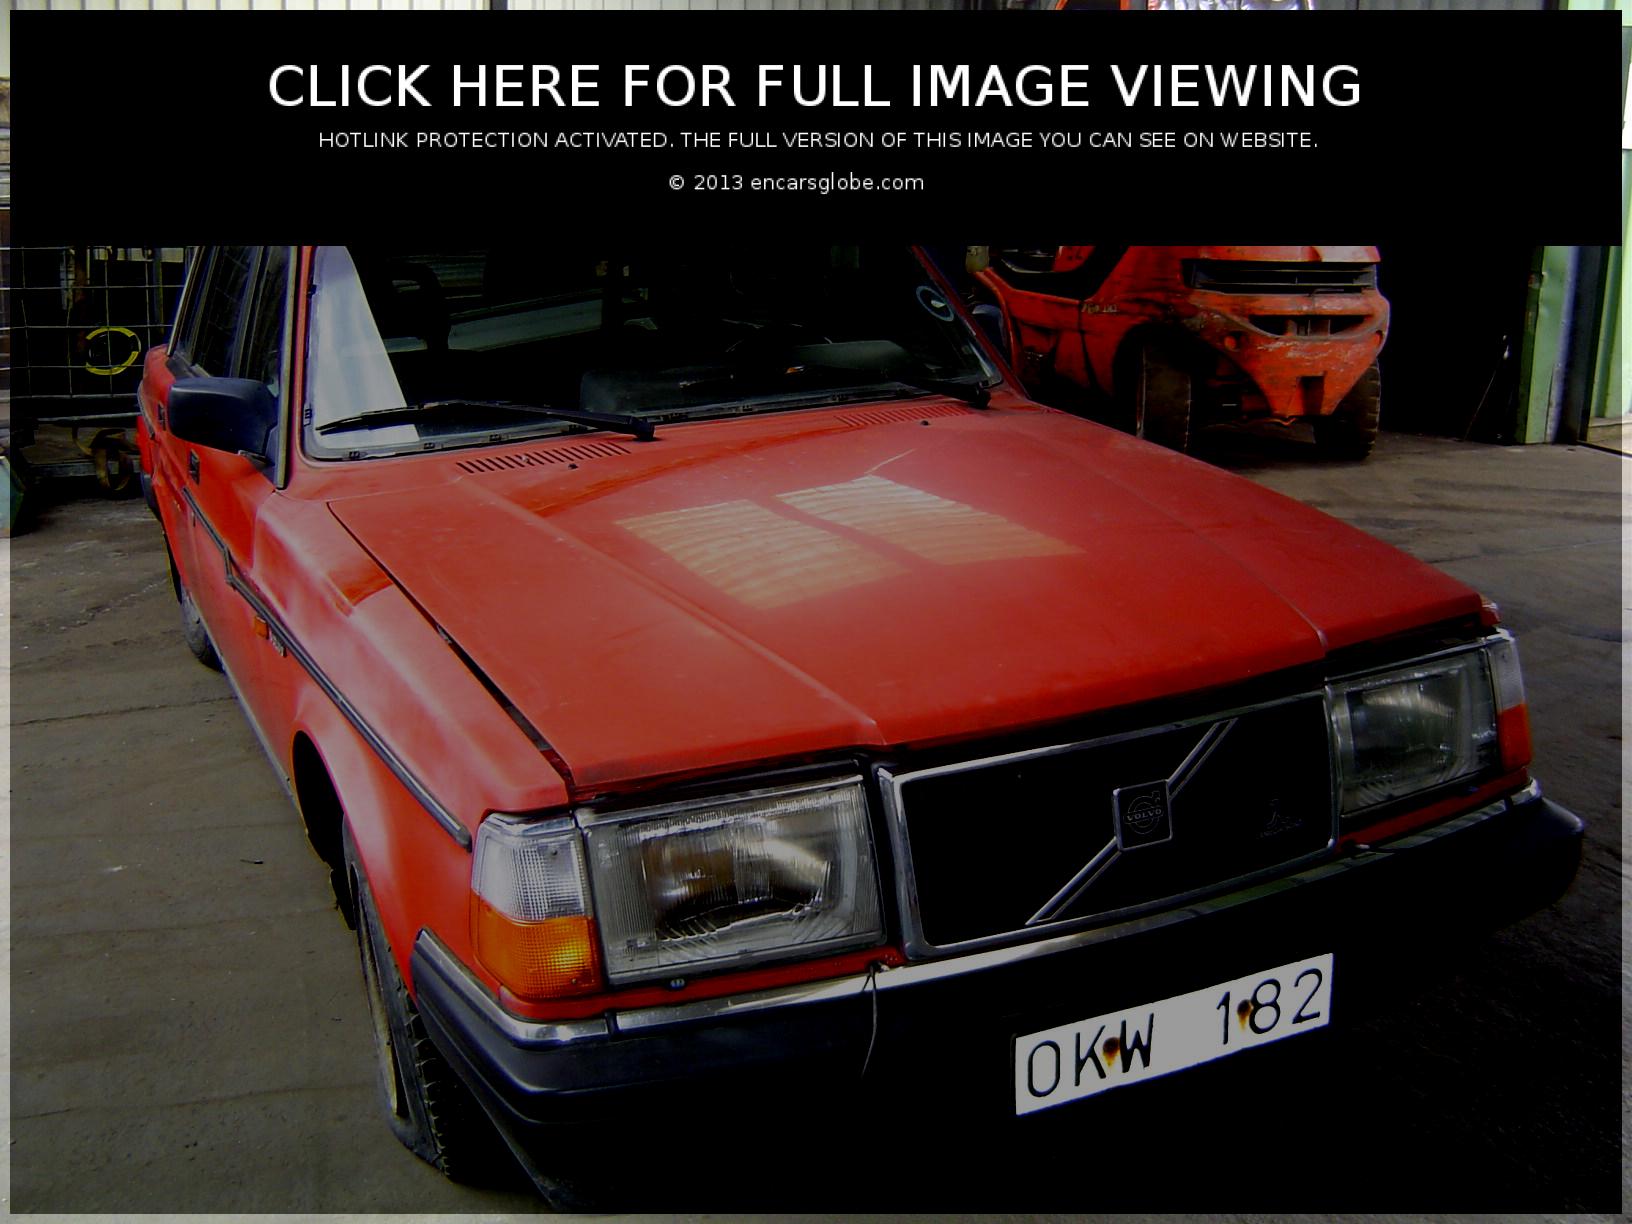 2, Volvo 240 Stretched Limousine